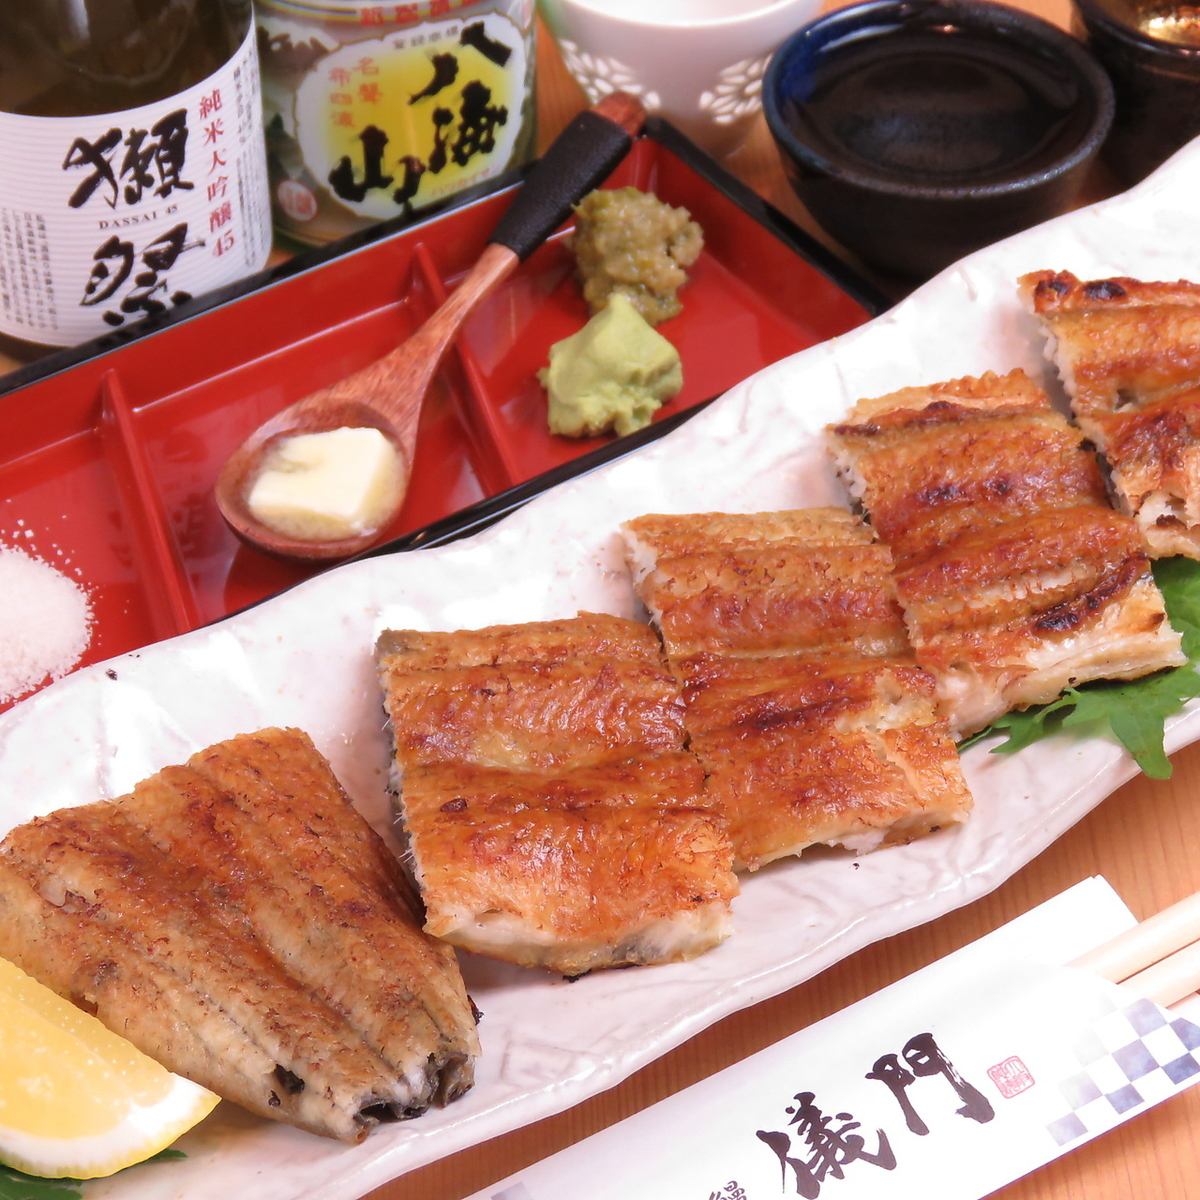 Completely charcoal grilled fresh eel by craftsmen ◎ We also have a lot of sake